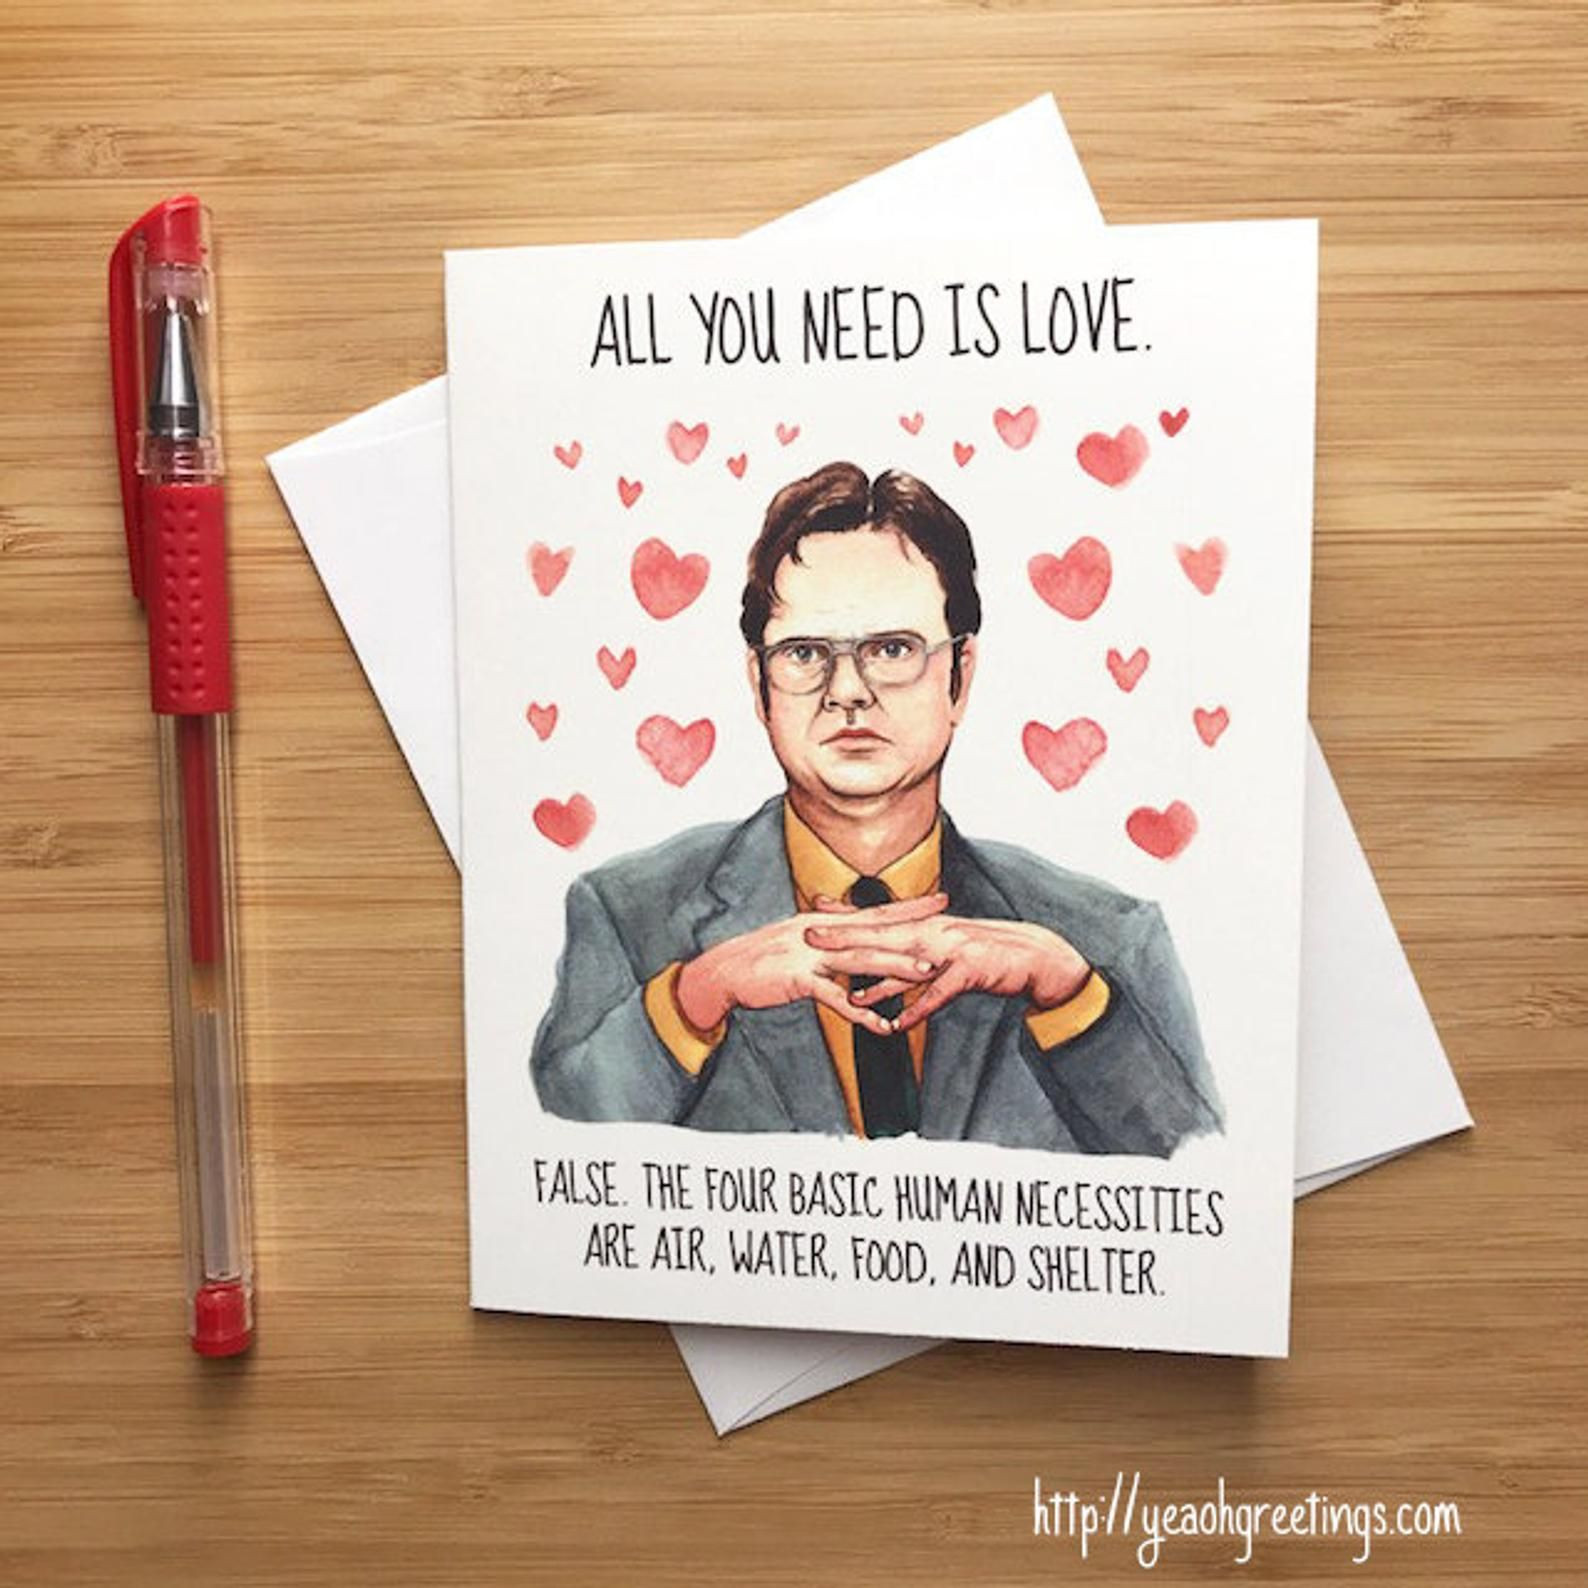 Valentine Gift Ideas For The Office
 Cute Dwight Love Card Funny fice Valentines Card Happy